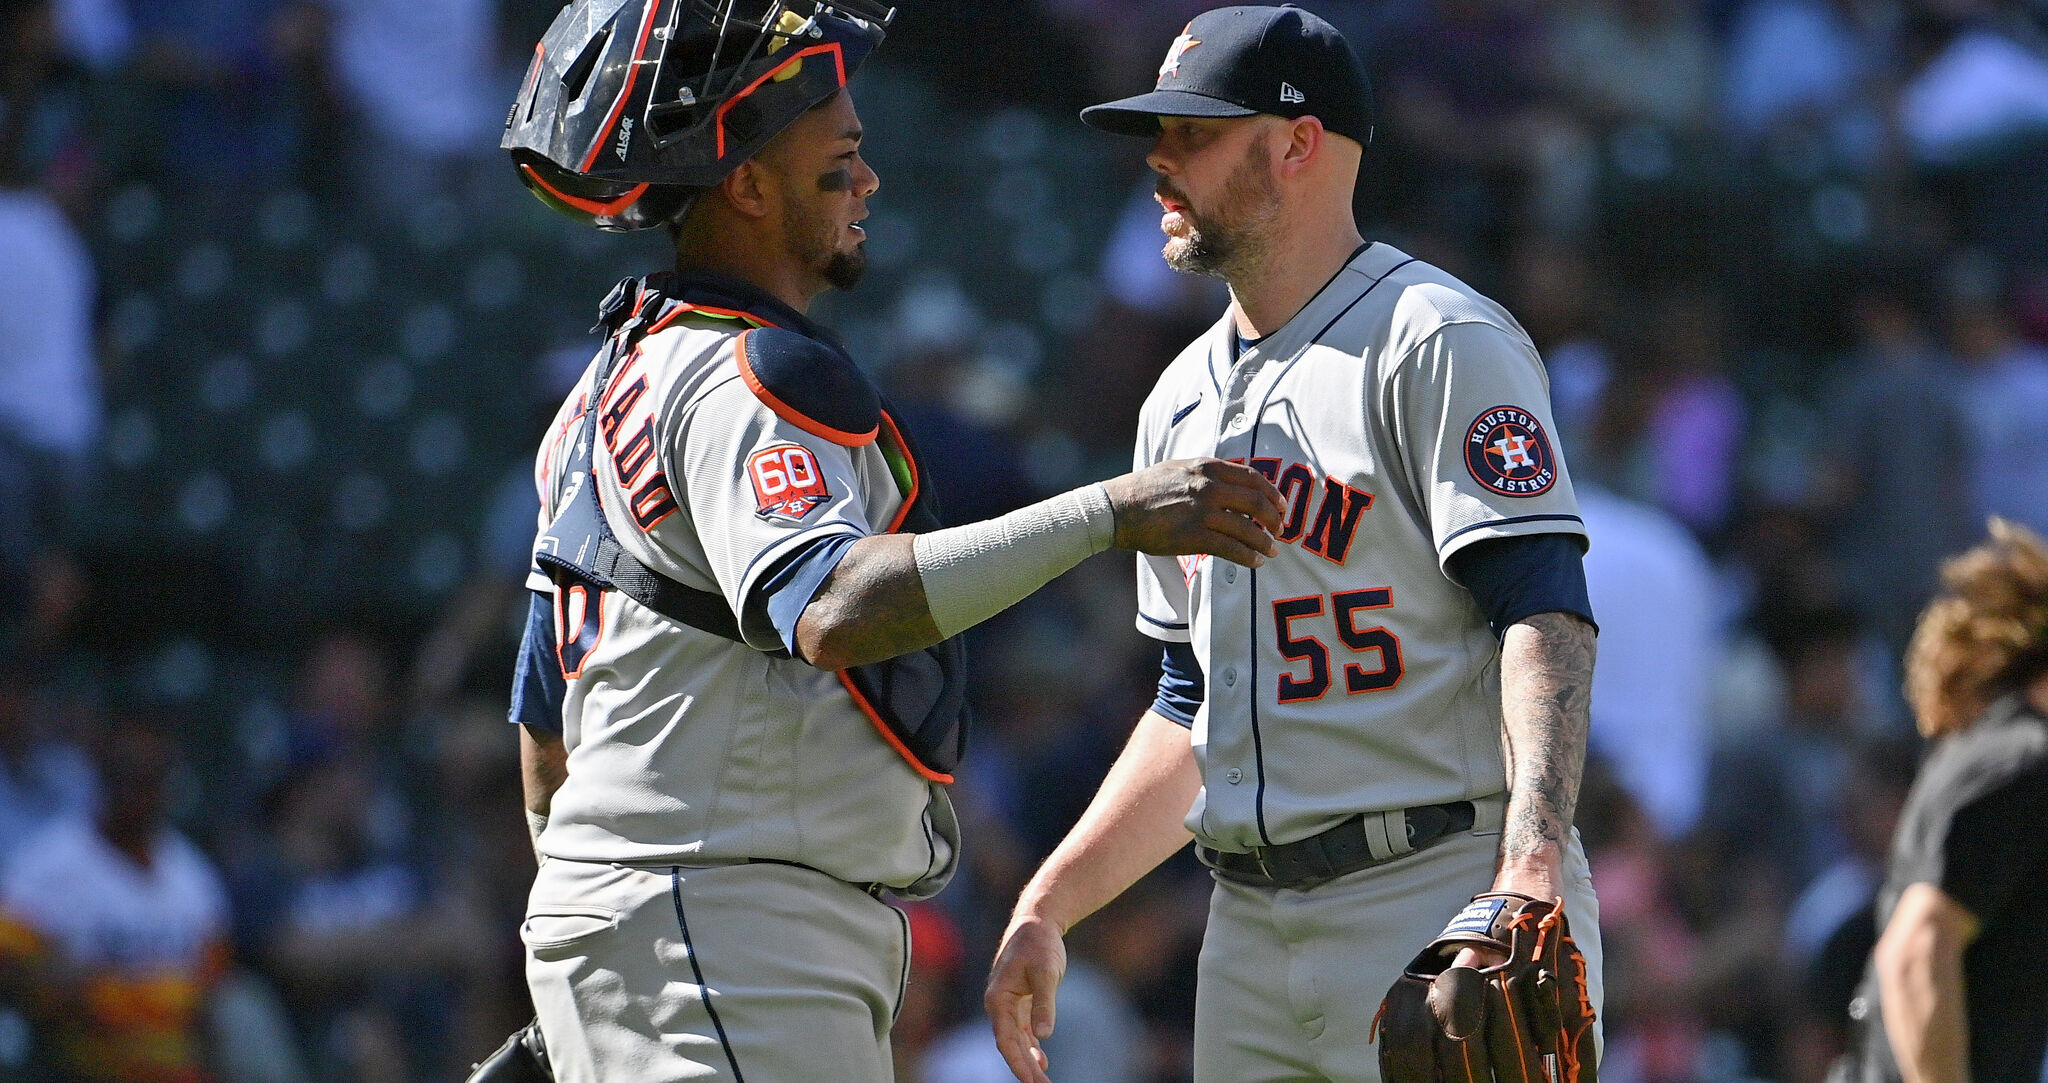 Ryan Pressly excited to be staying with Astros